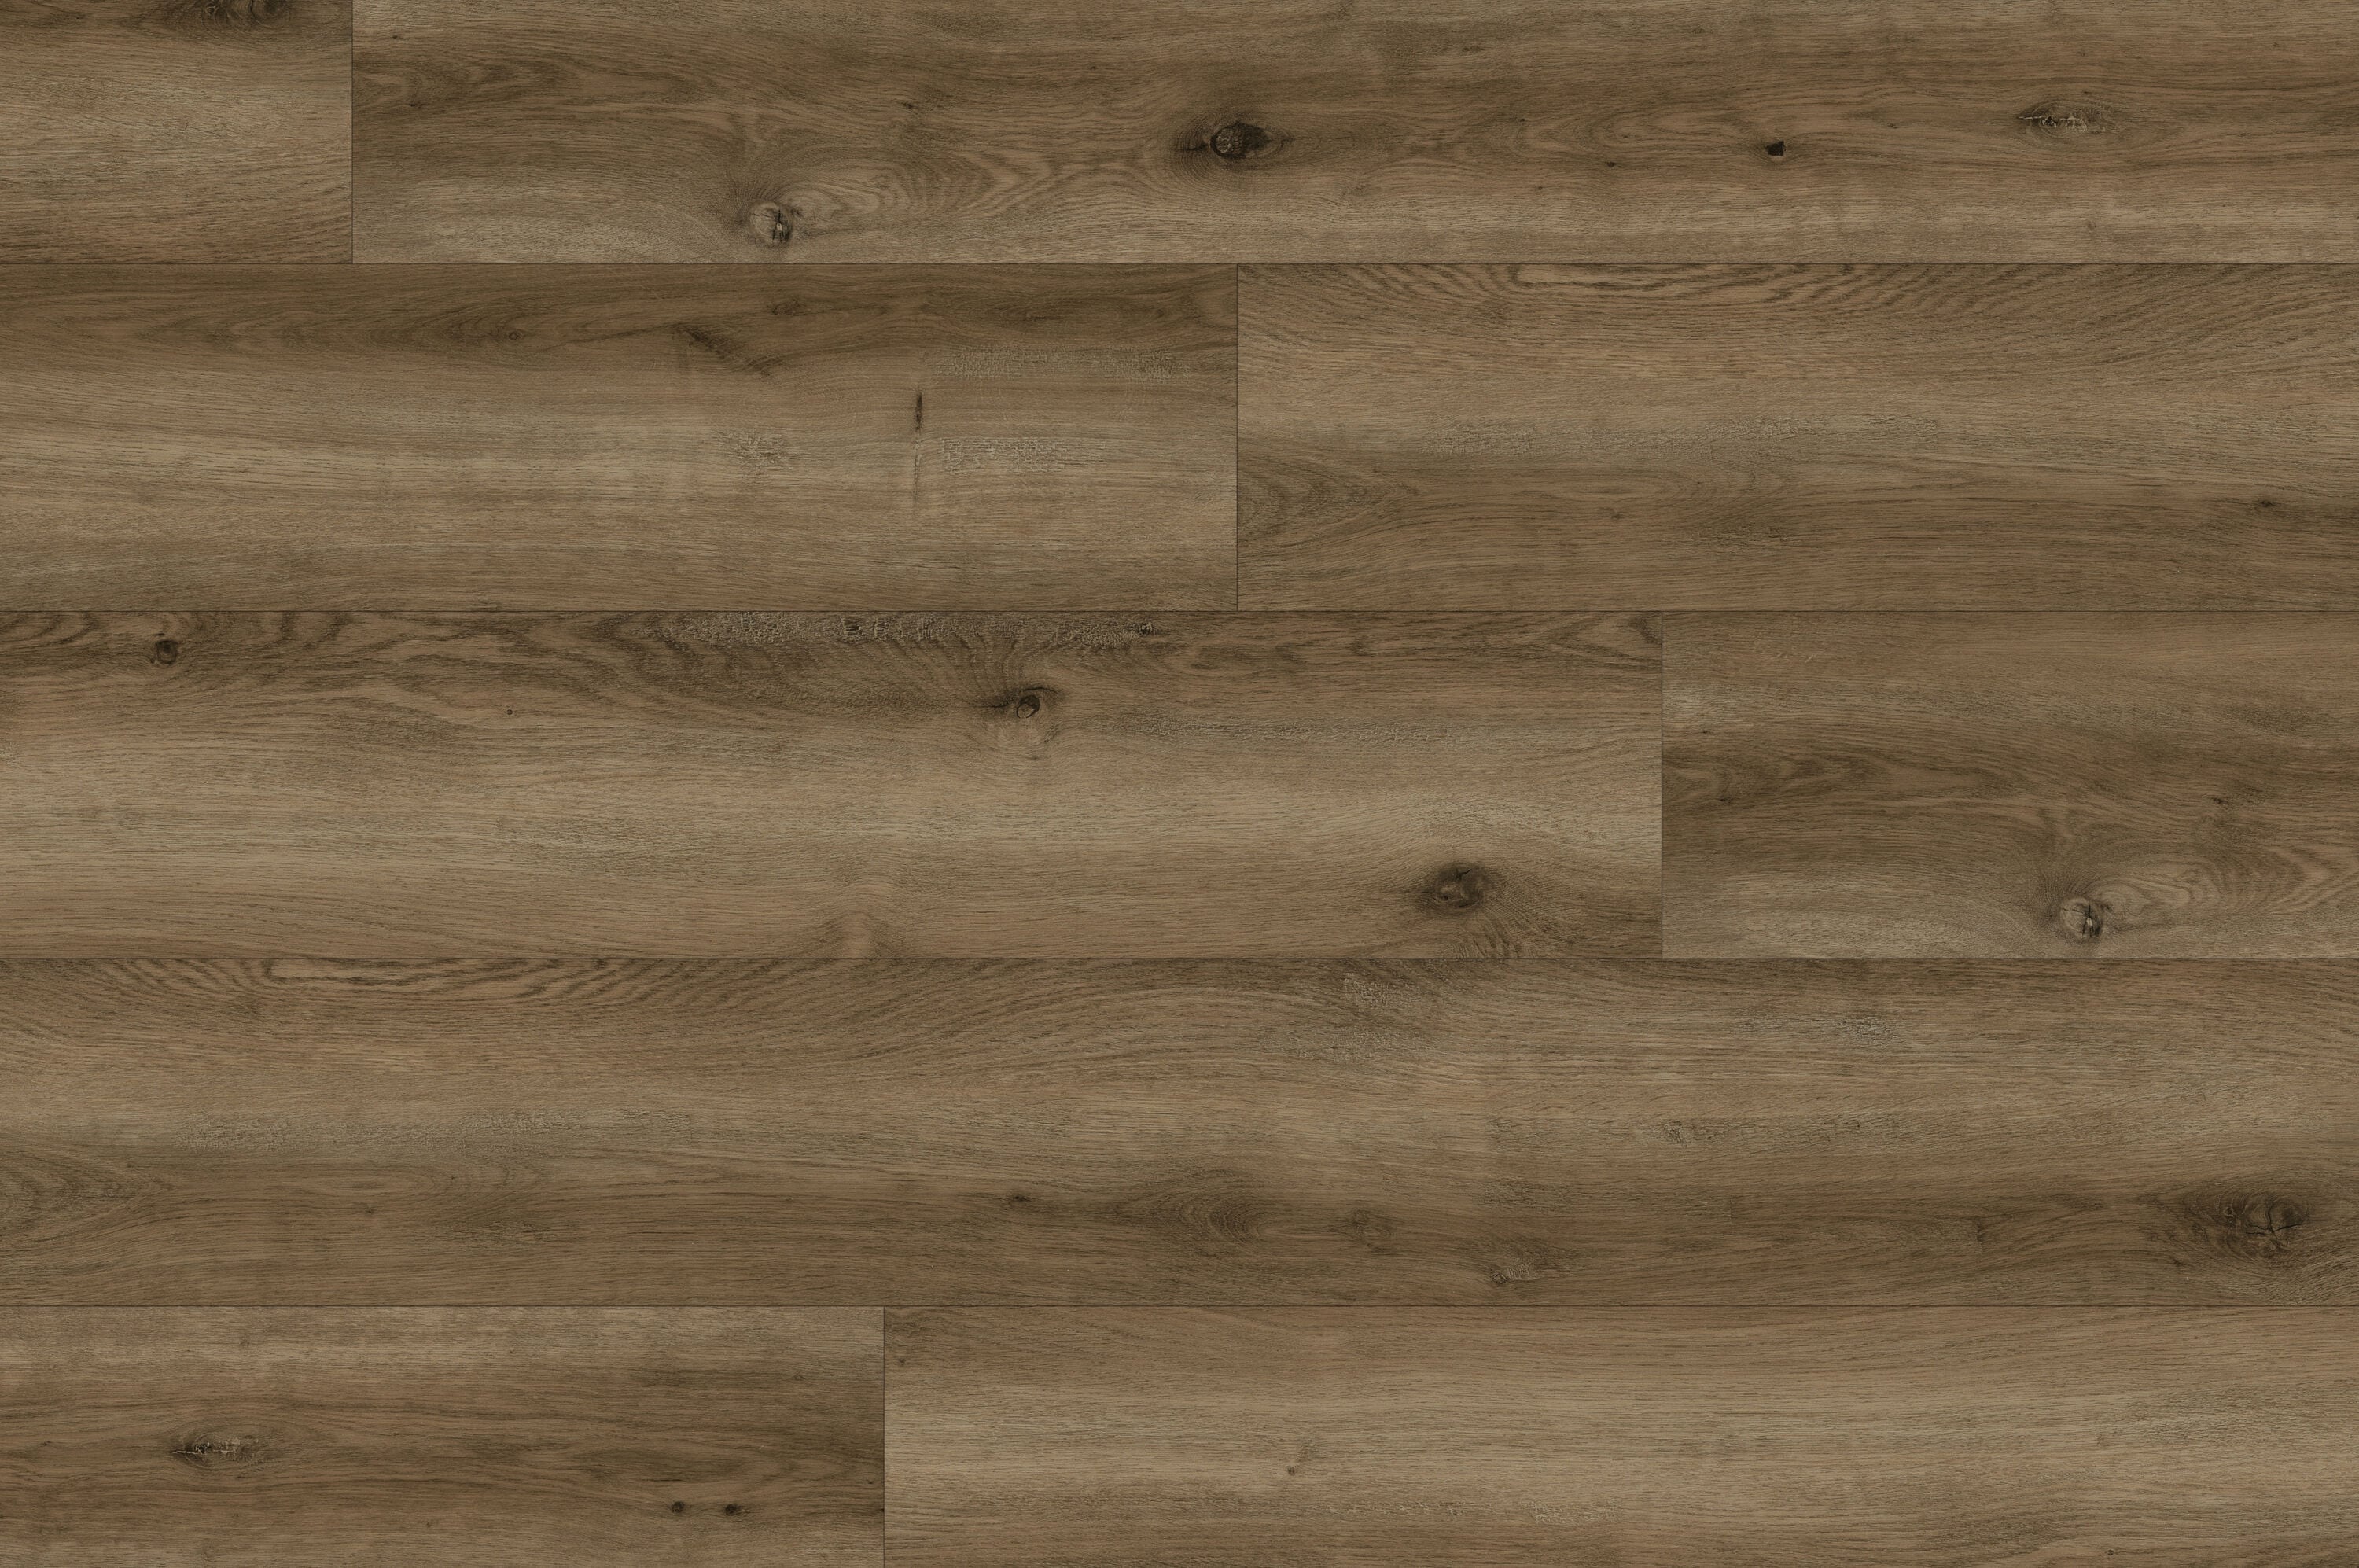 Lvp Flooring at Lowes: Get the Best Deals on Laminate, Vinyl, and Wood Planks